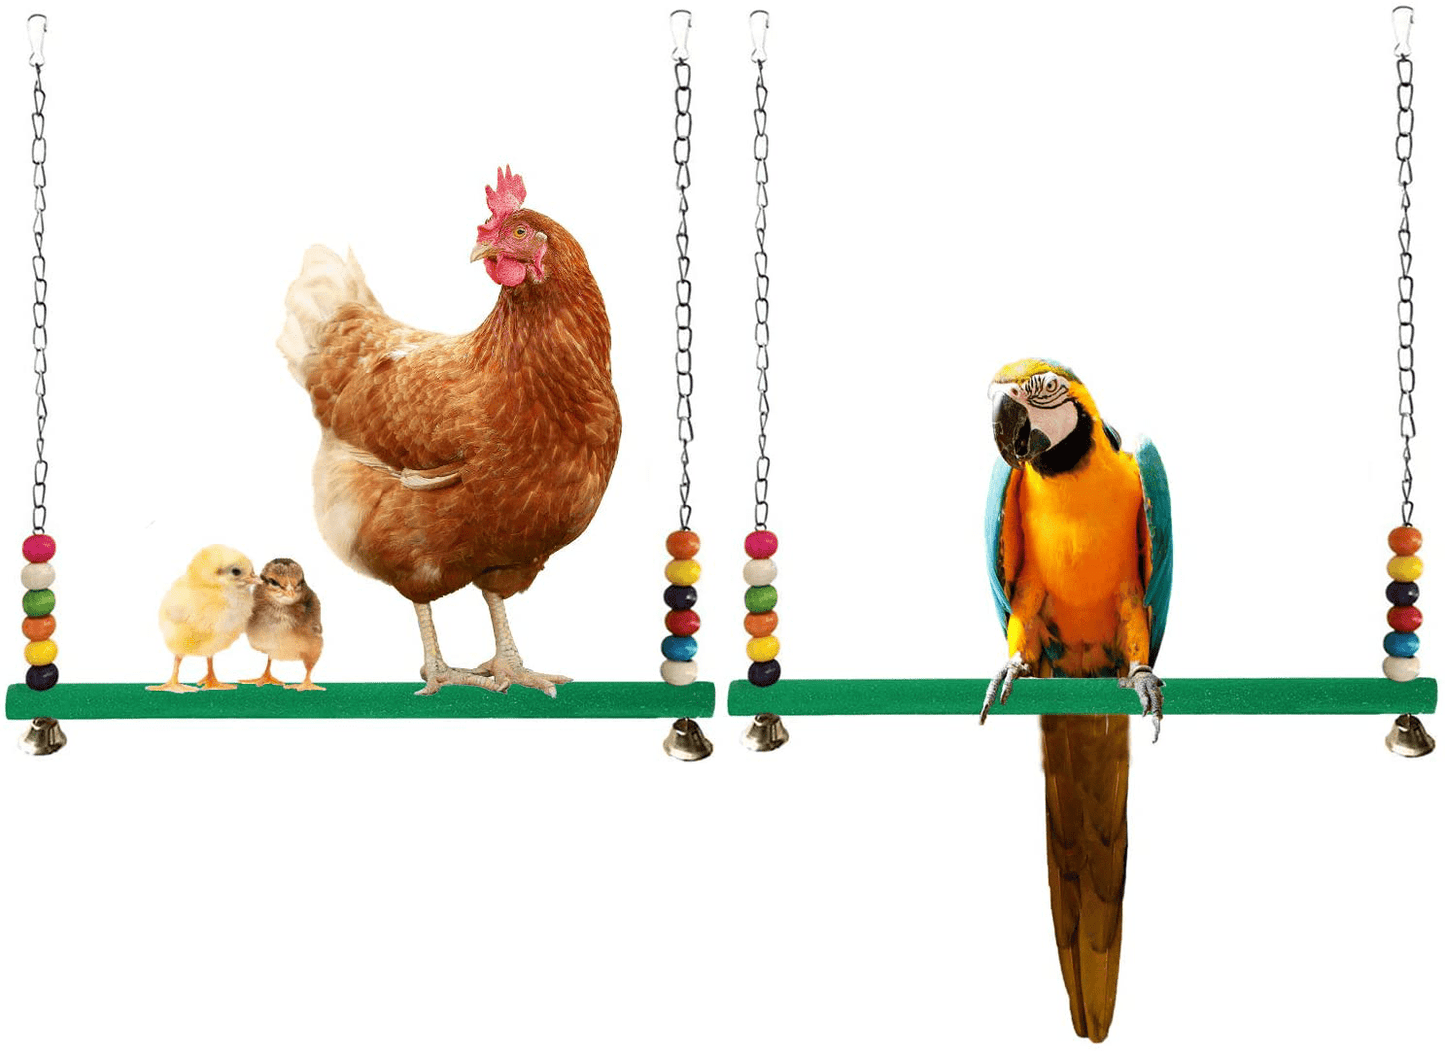 2 Pack Buytra Chicken Swing Toy for Hens with Colorful Wooden Beads and Bells - Natural Wood Chicken Ladder Perch Stand for Chicks - Bird Swing for Parrots - Great Chicken Coop Accessories